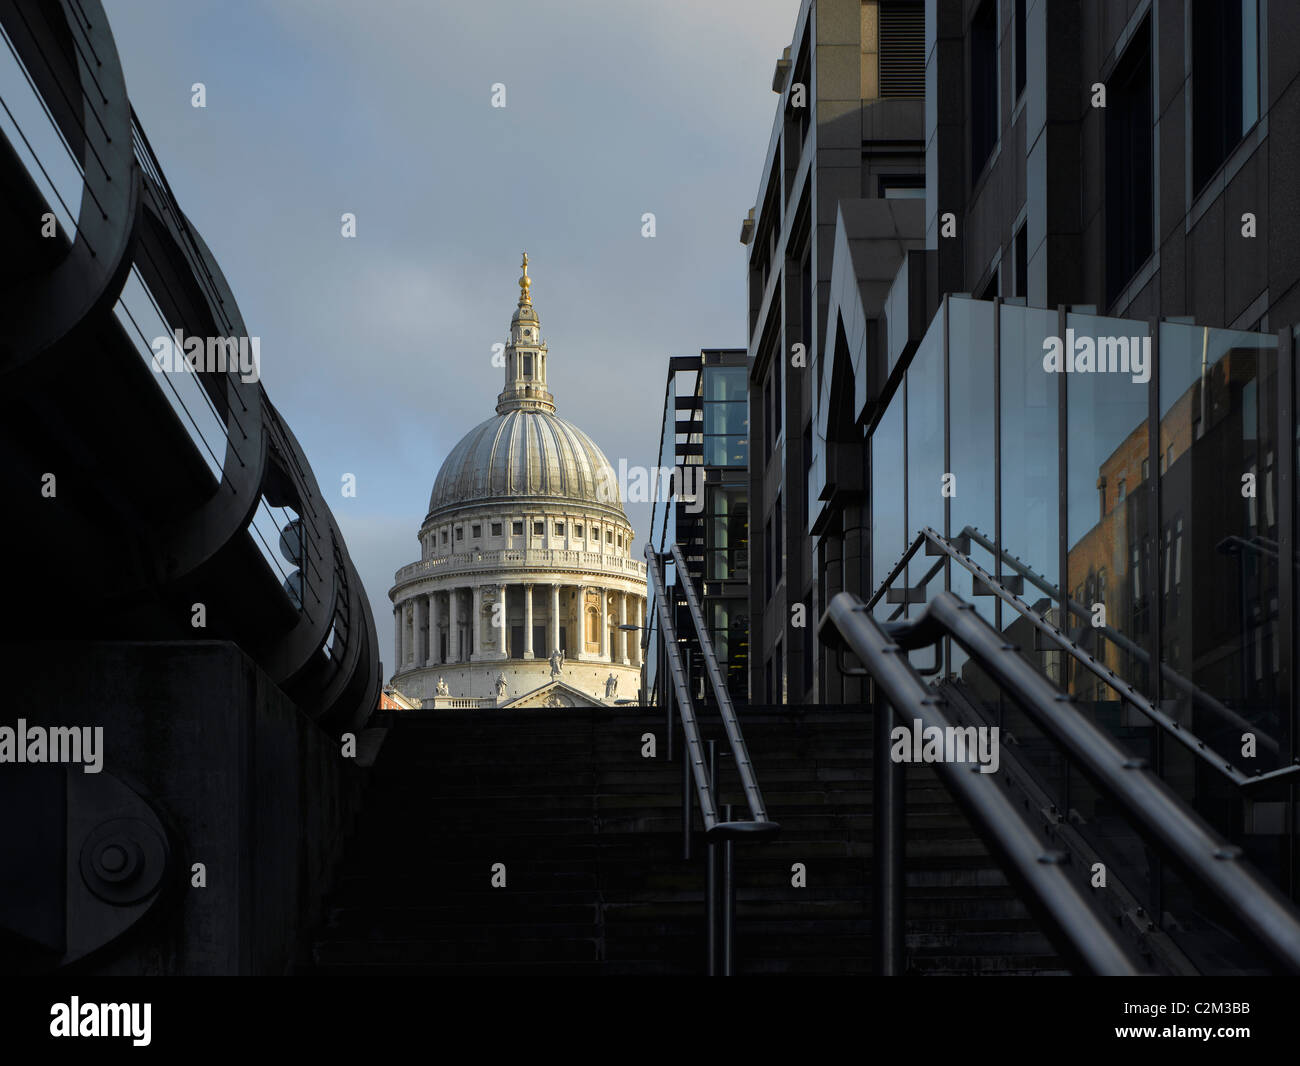 Glimpse of St. Paul's Cathedral dome, London. Stock Photo